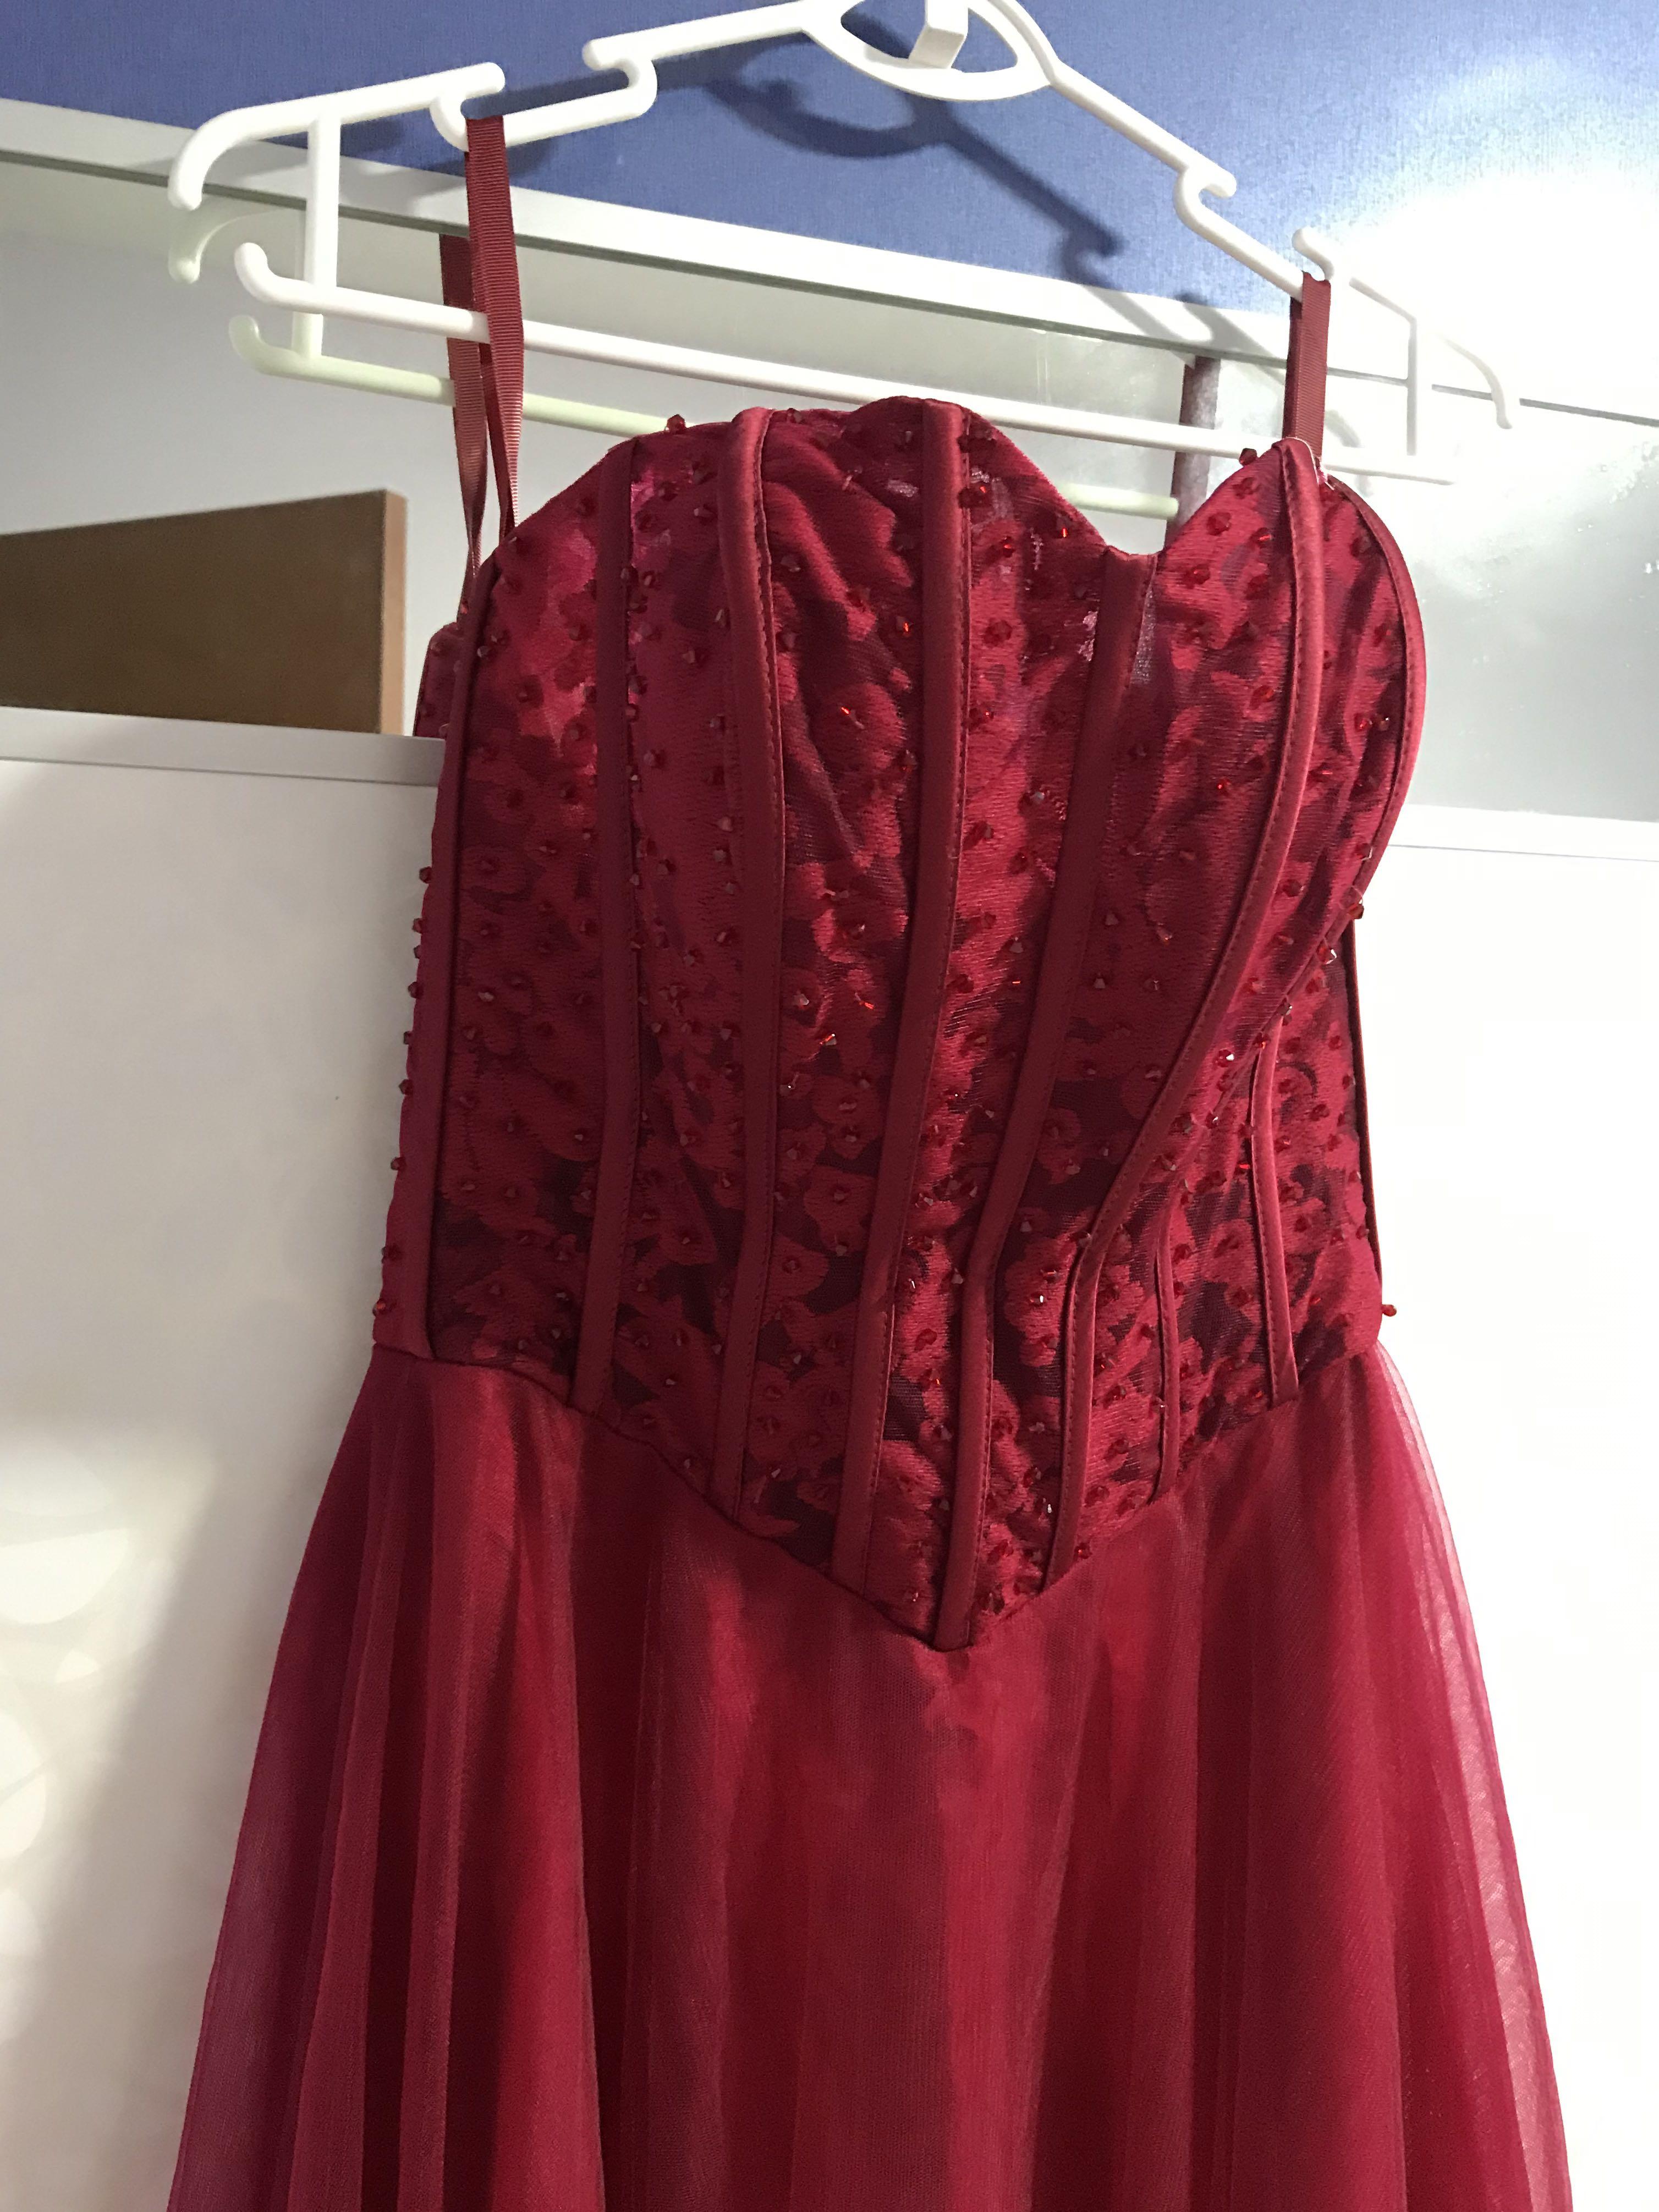 red night gown dresses